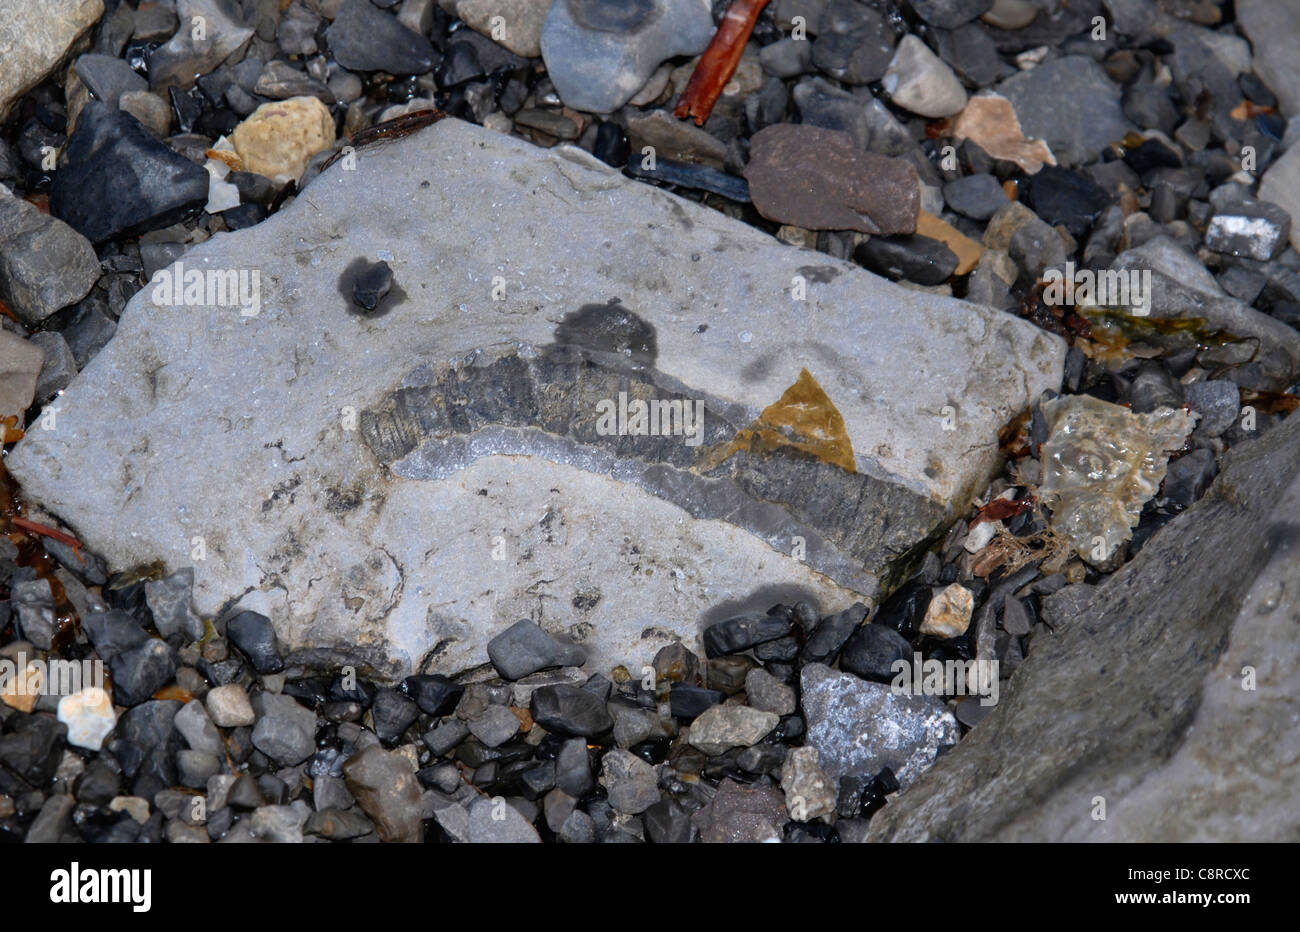 Unidentified fossil of a vertebrate, Trygghamna, Isfjord, Spitsbergen Stock Photo